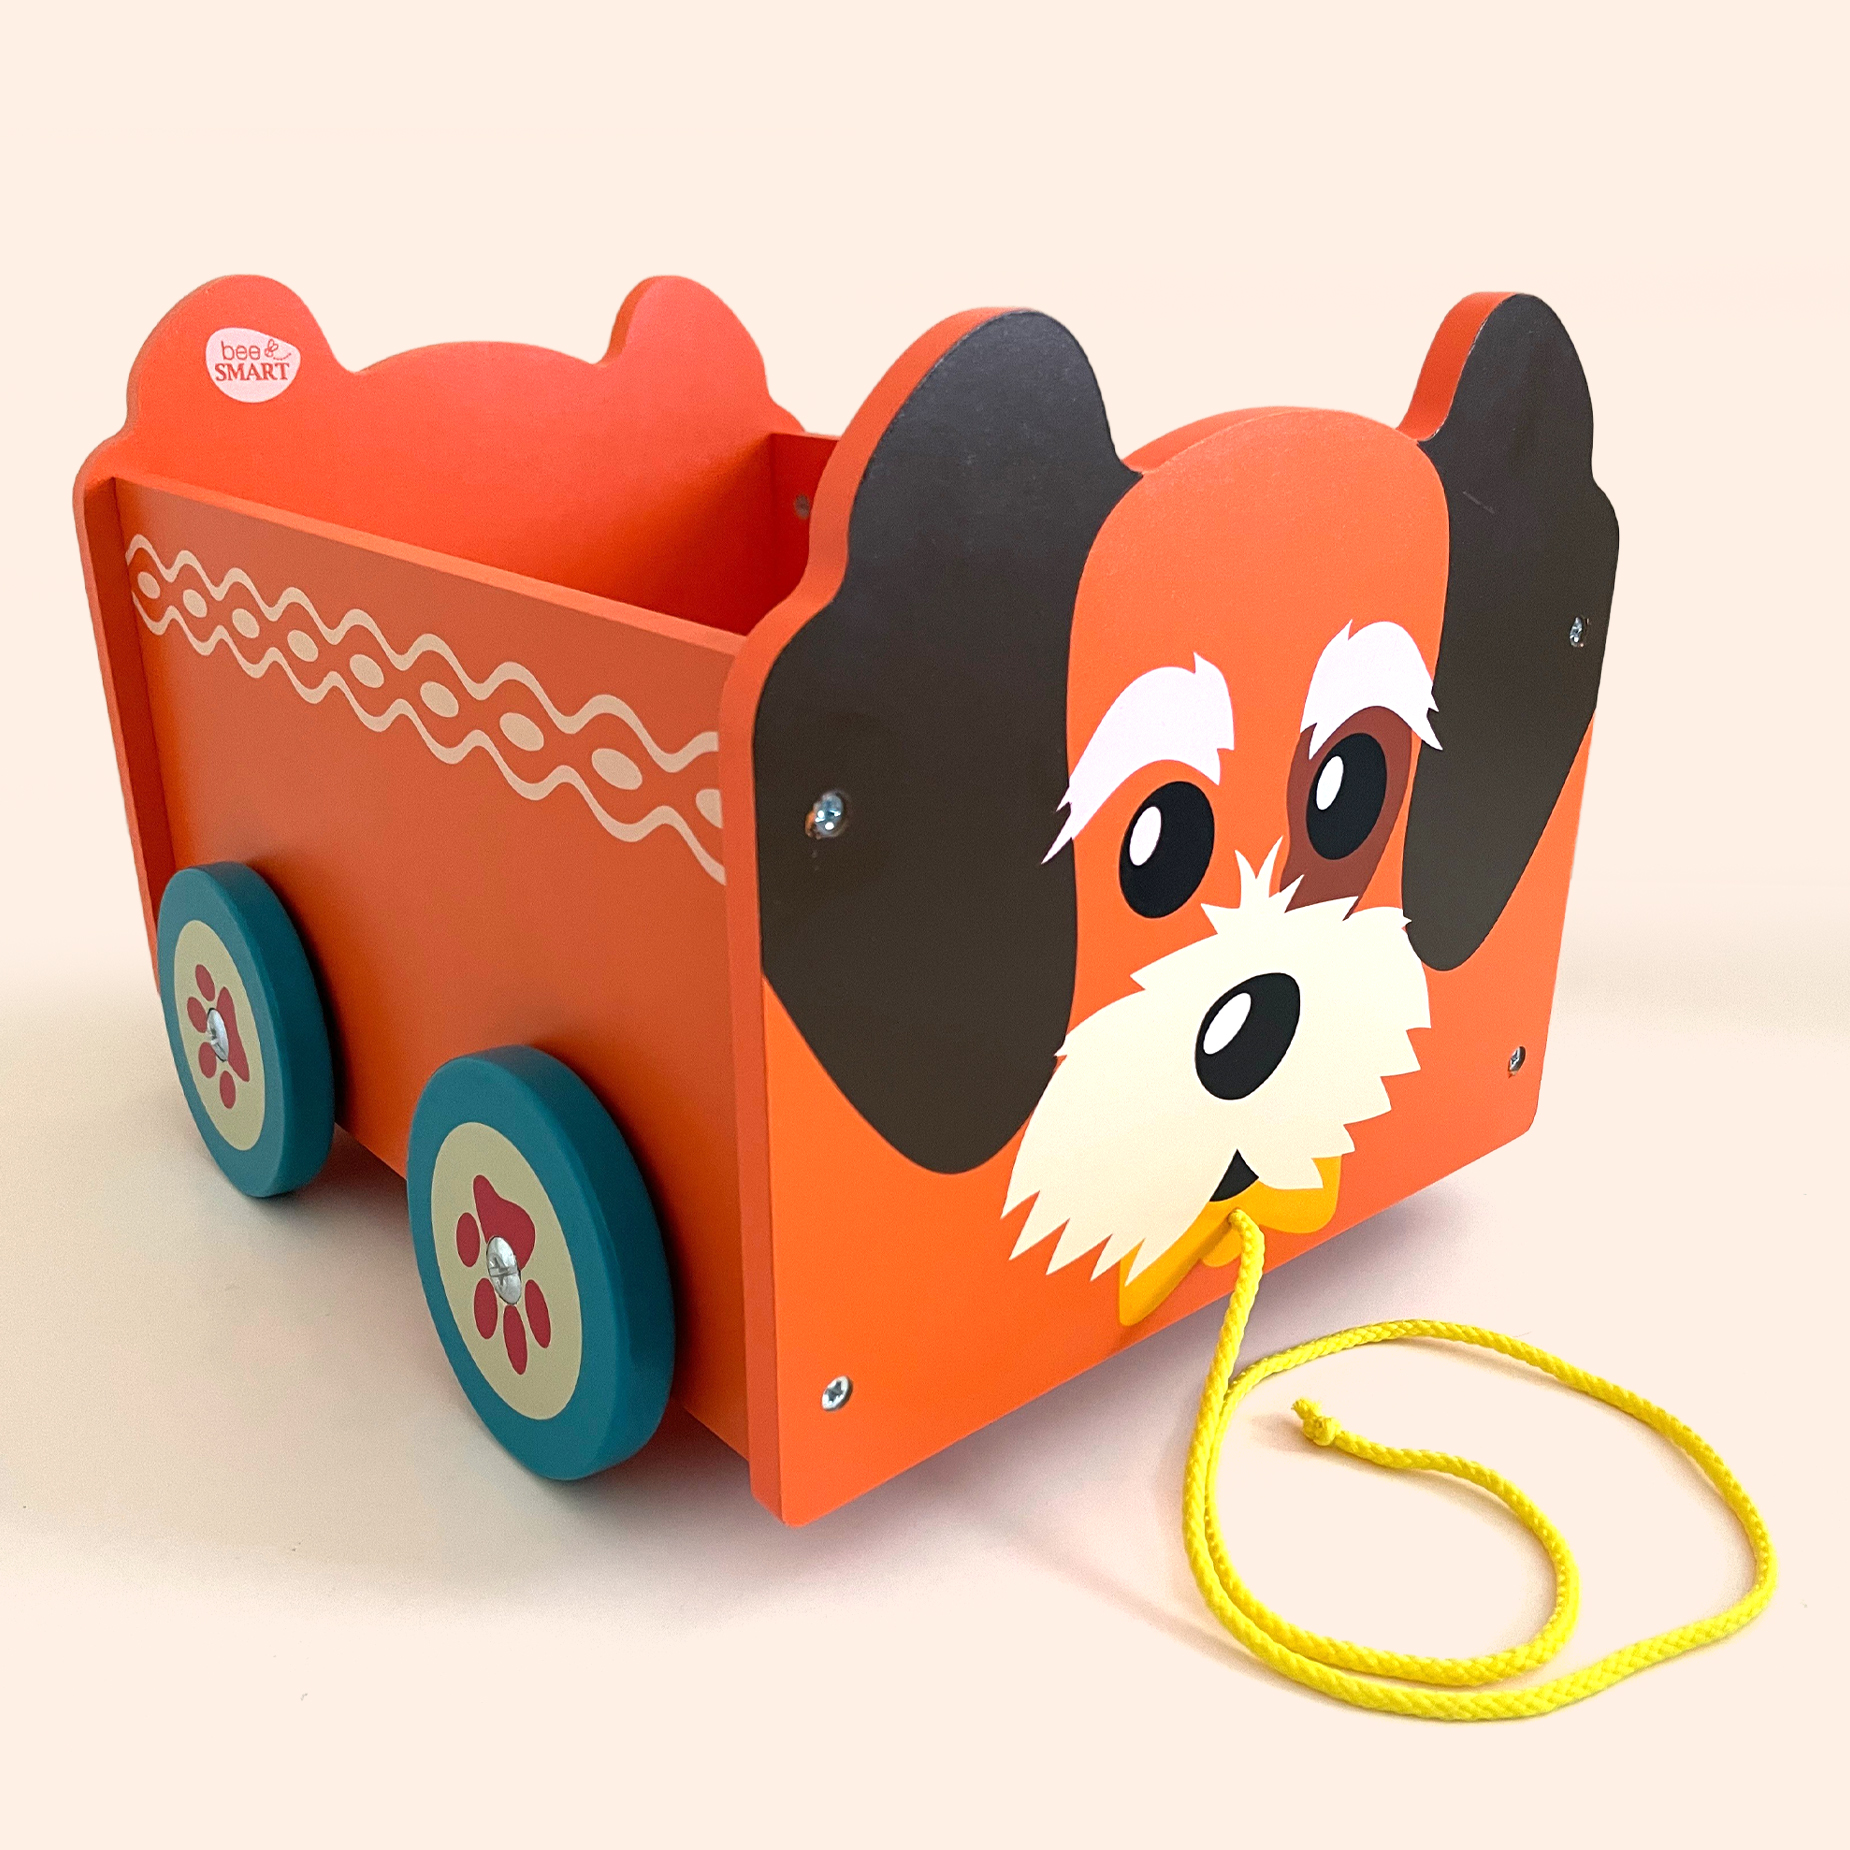 Great Wooden Toy Gift for Children